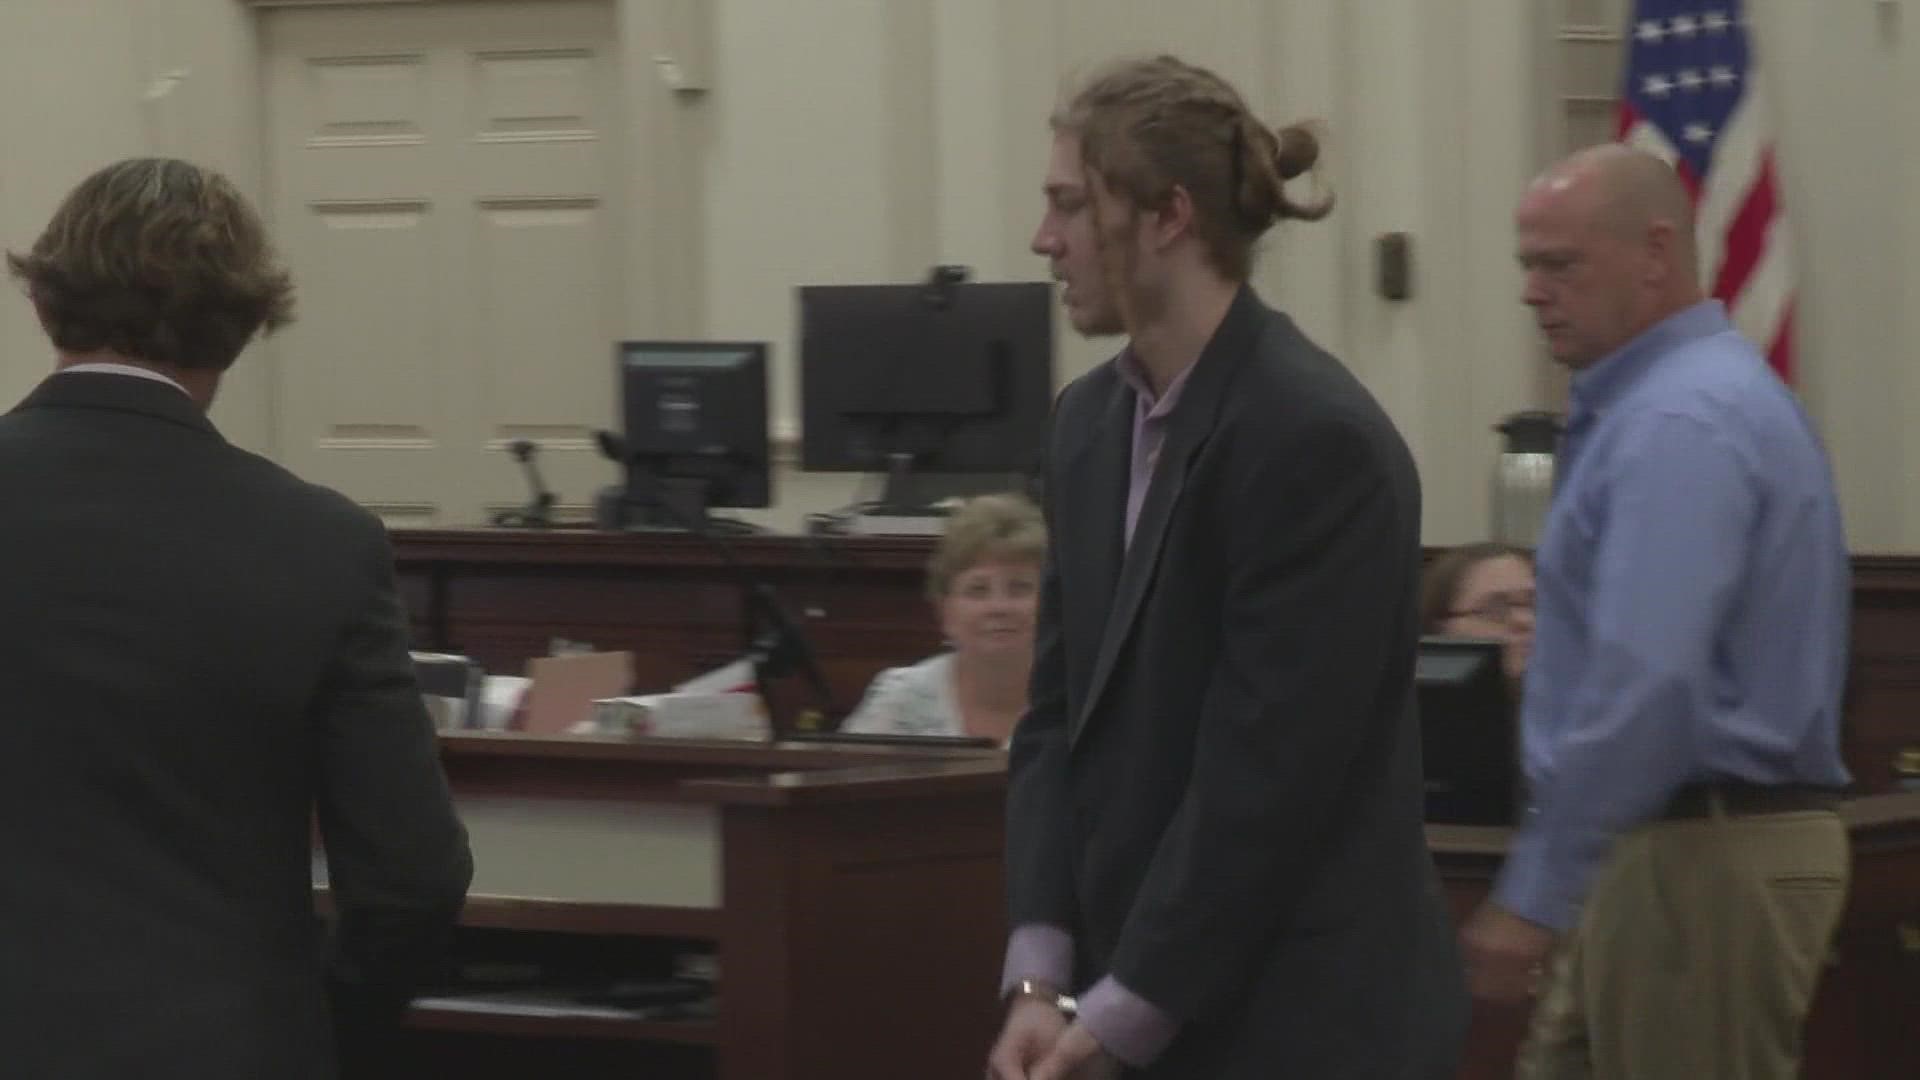 A judge expects to decide whether to allow bail for Andrew Huber Young in about two weeks following Friday's hearing.